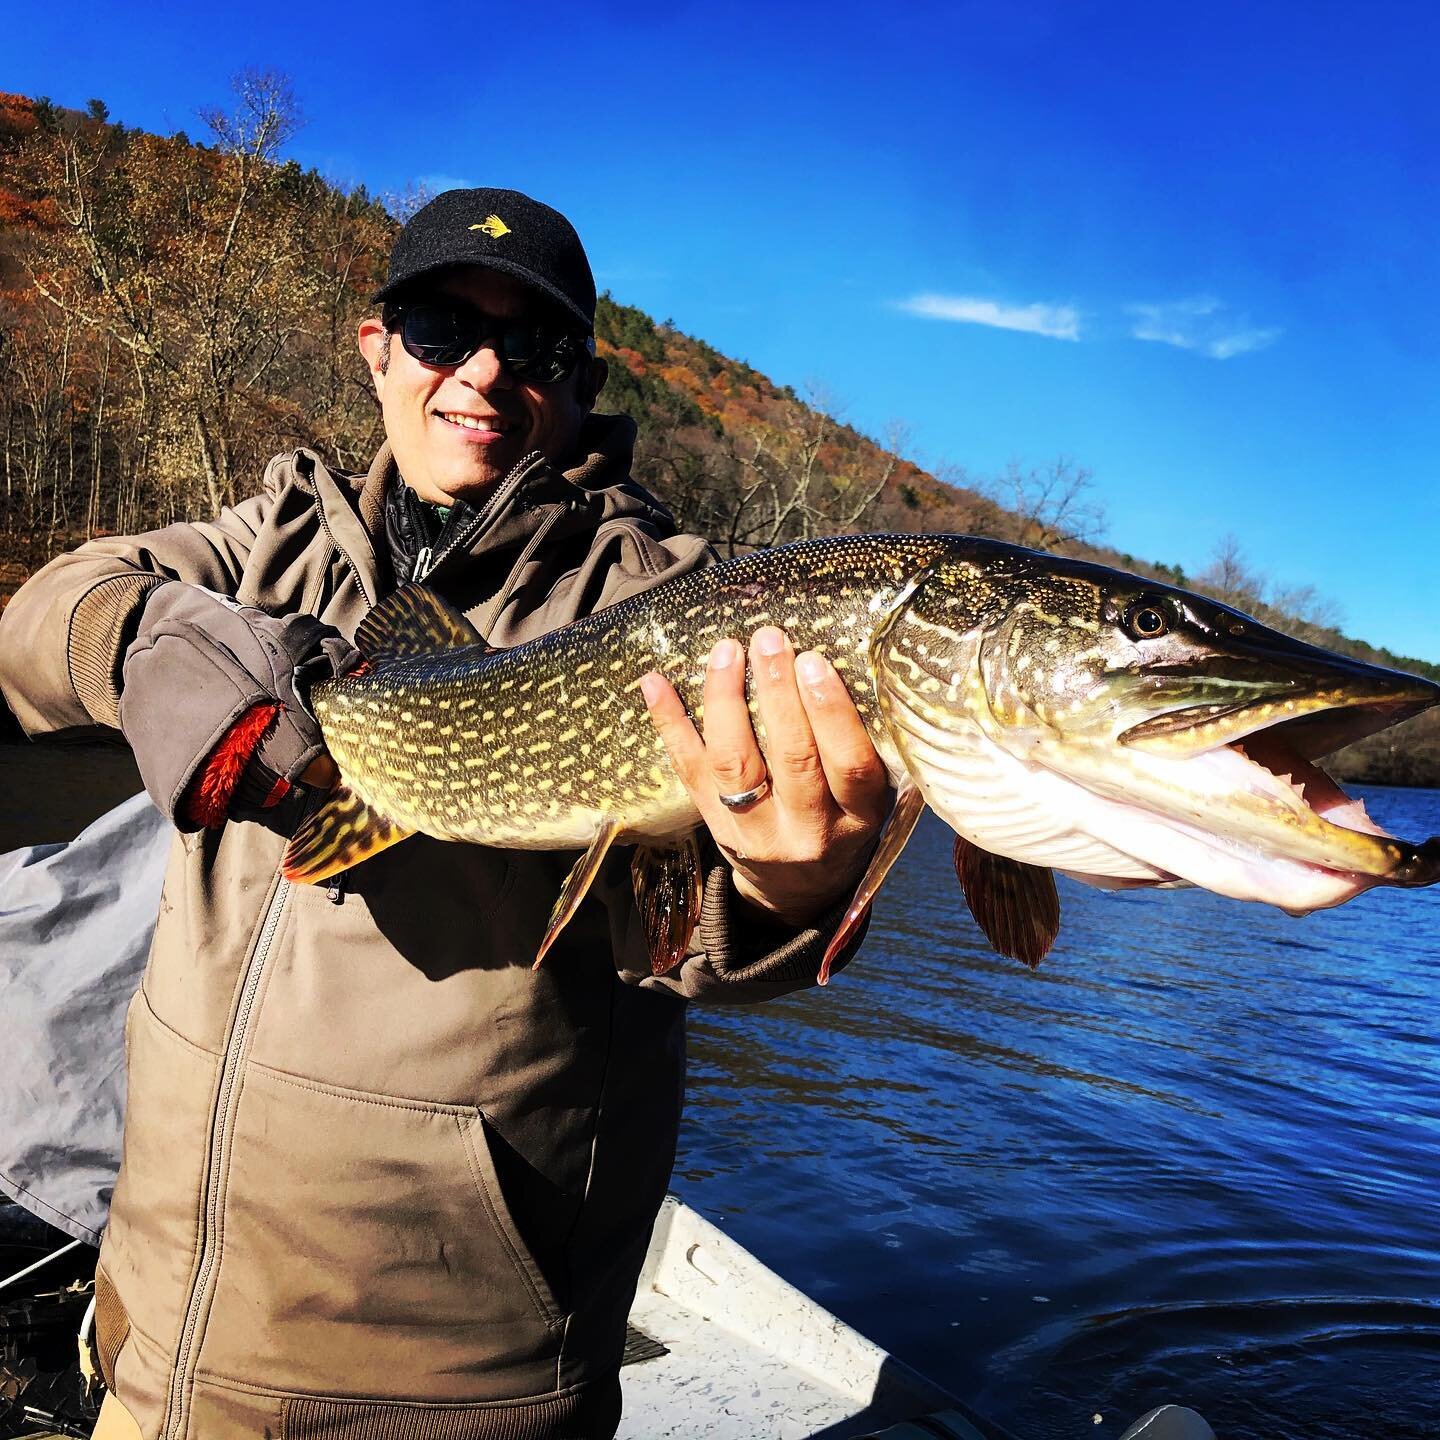 Check out the Fishing Daddy @troutmostly with this big pike on the fly! #pikefishing #pike #flyfishing #flyfishingaddict